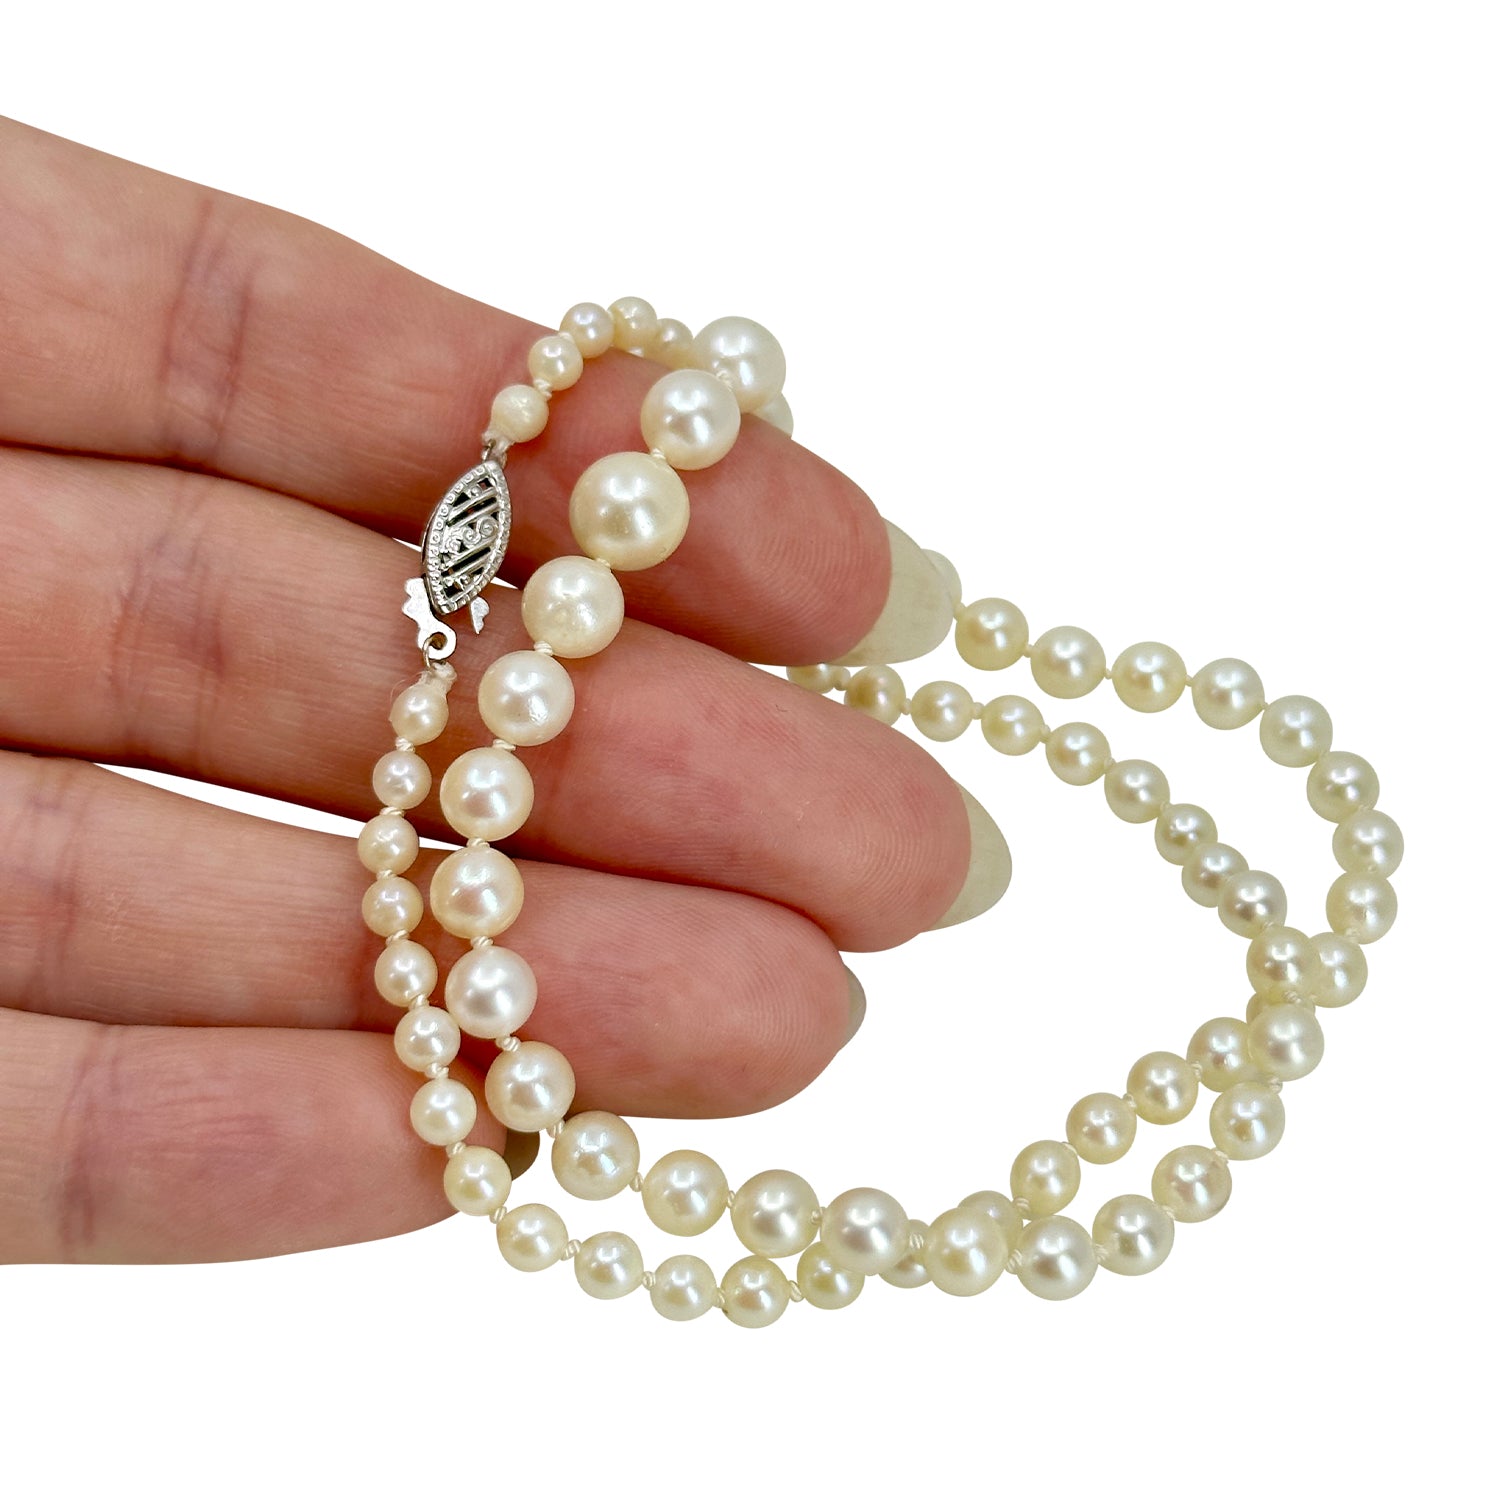 Choker Vintage Modern Japanese Saltwater Akoya Cultured Pearl Necklace - 10K White Gold 15.25 Inch